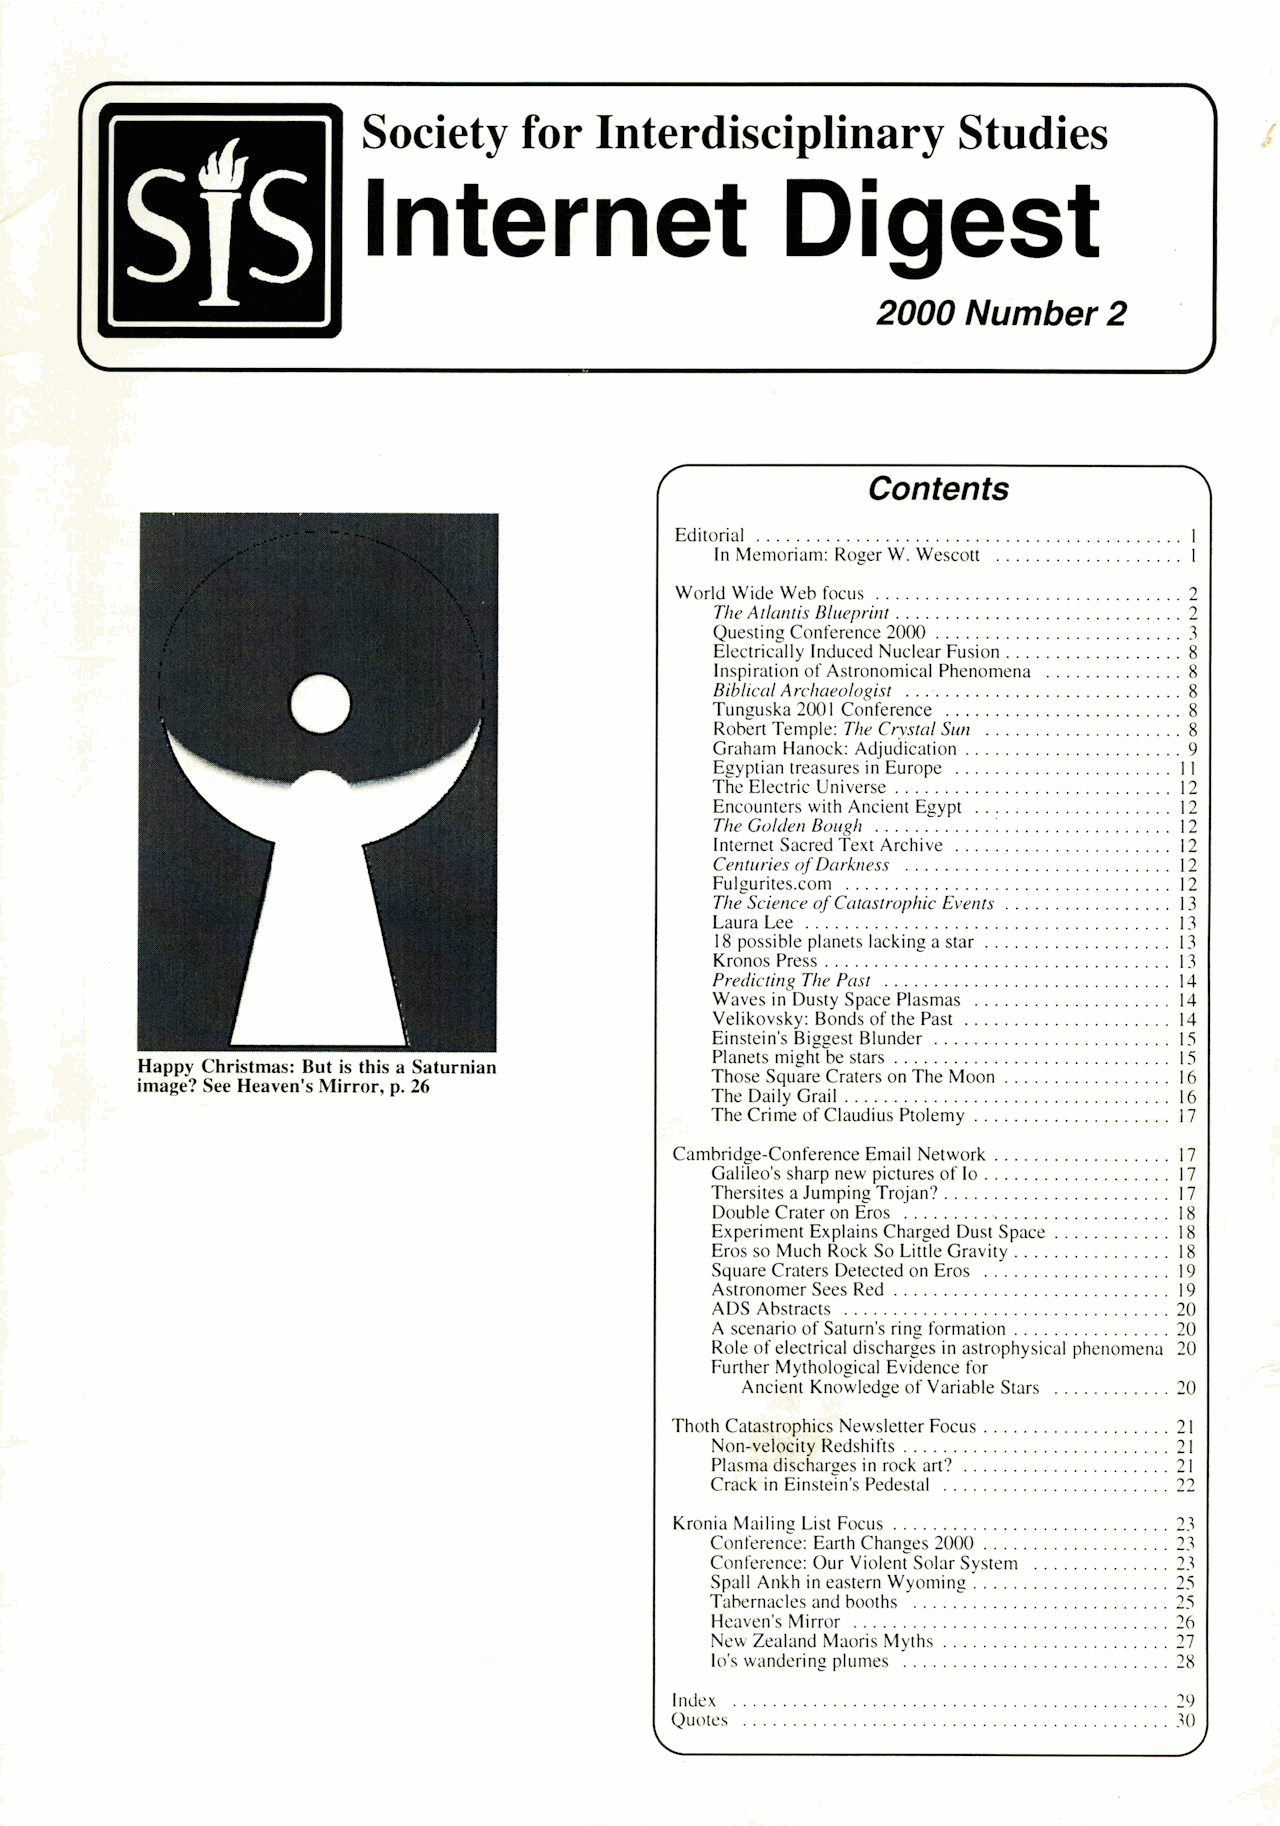 SIS Internet Digest 2000-2 cover